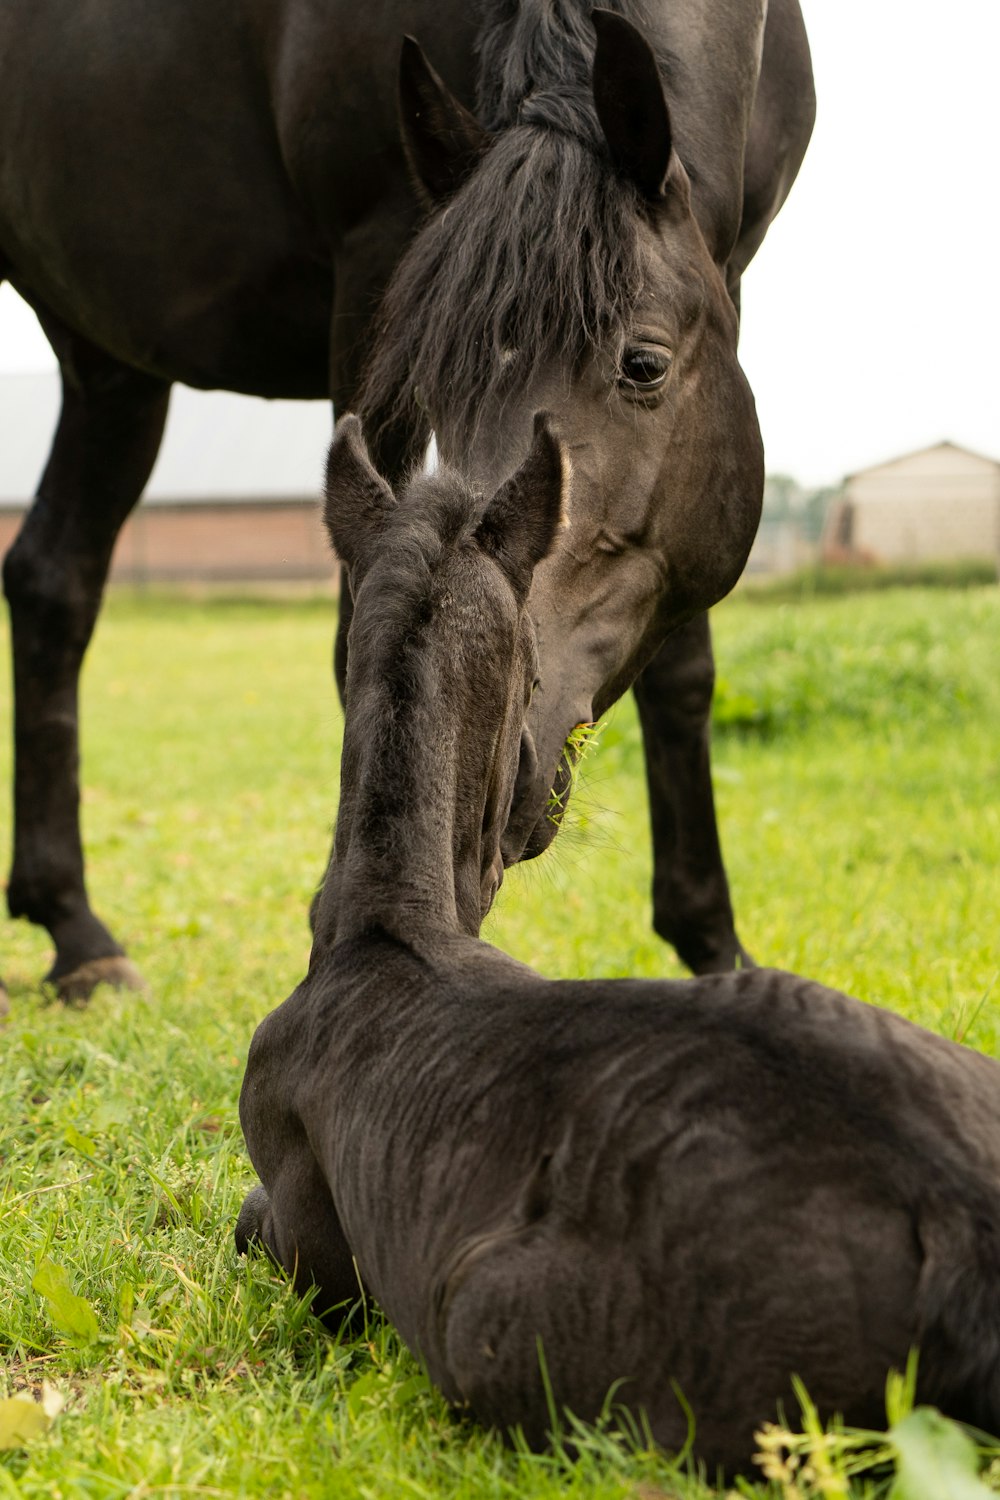 a horse and a baby horse